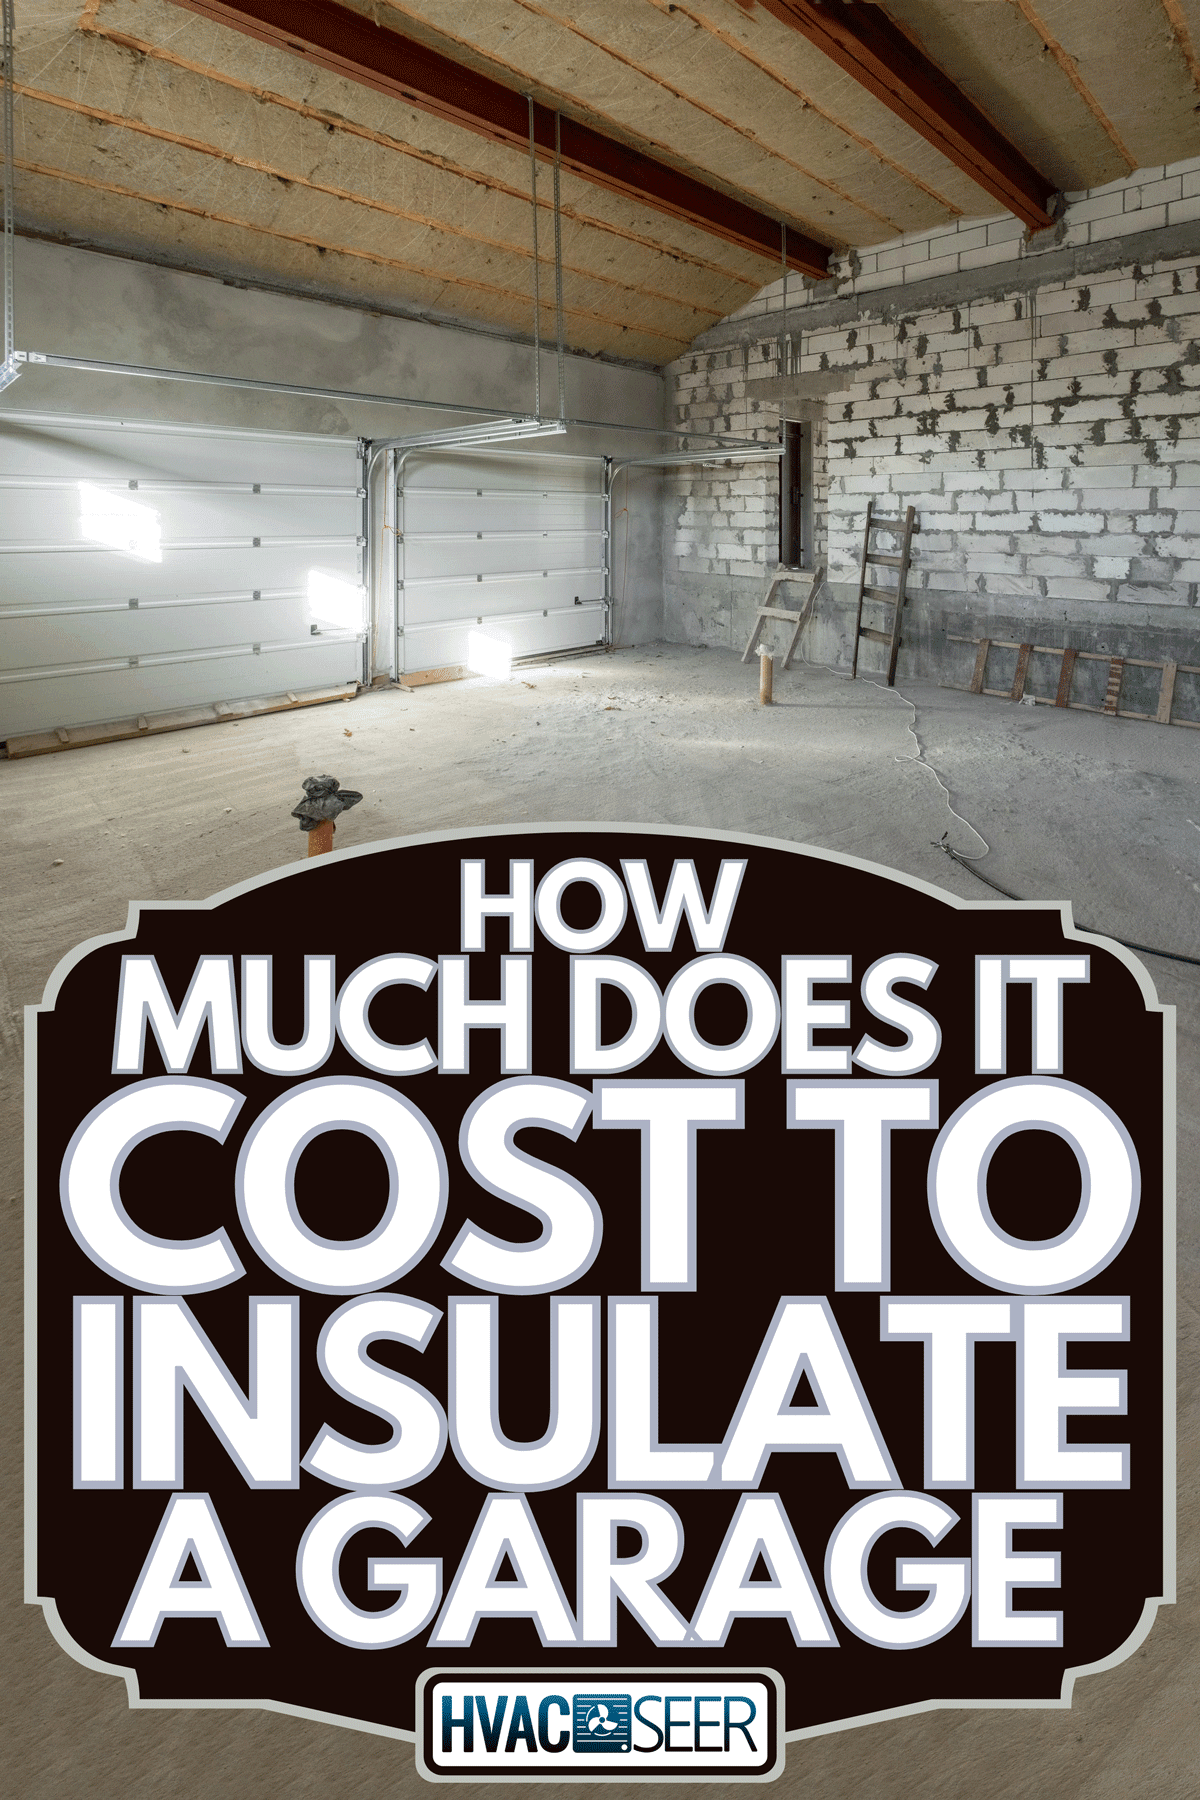 Overhaul and reconstruction of large garage for two cars, How Much Does It Cost To Insulate A Garage